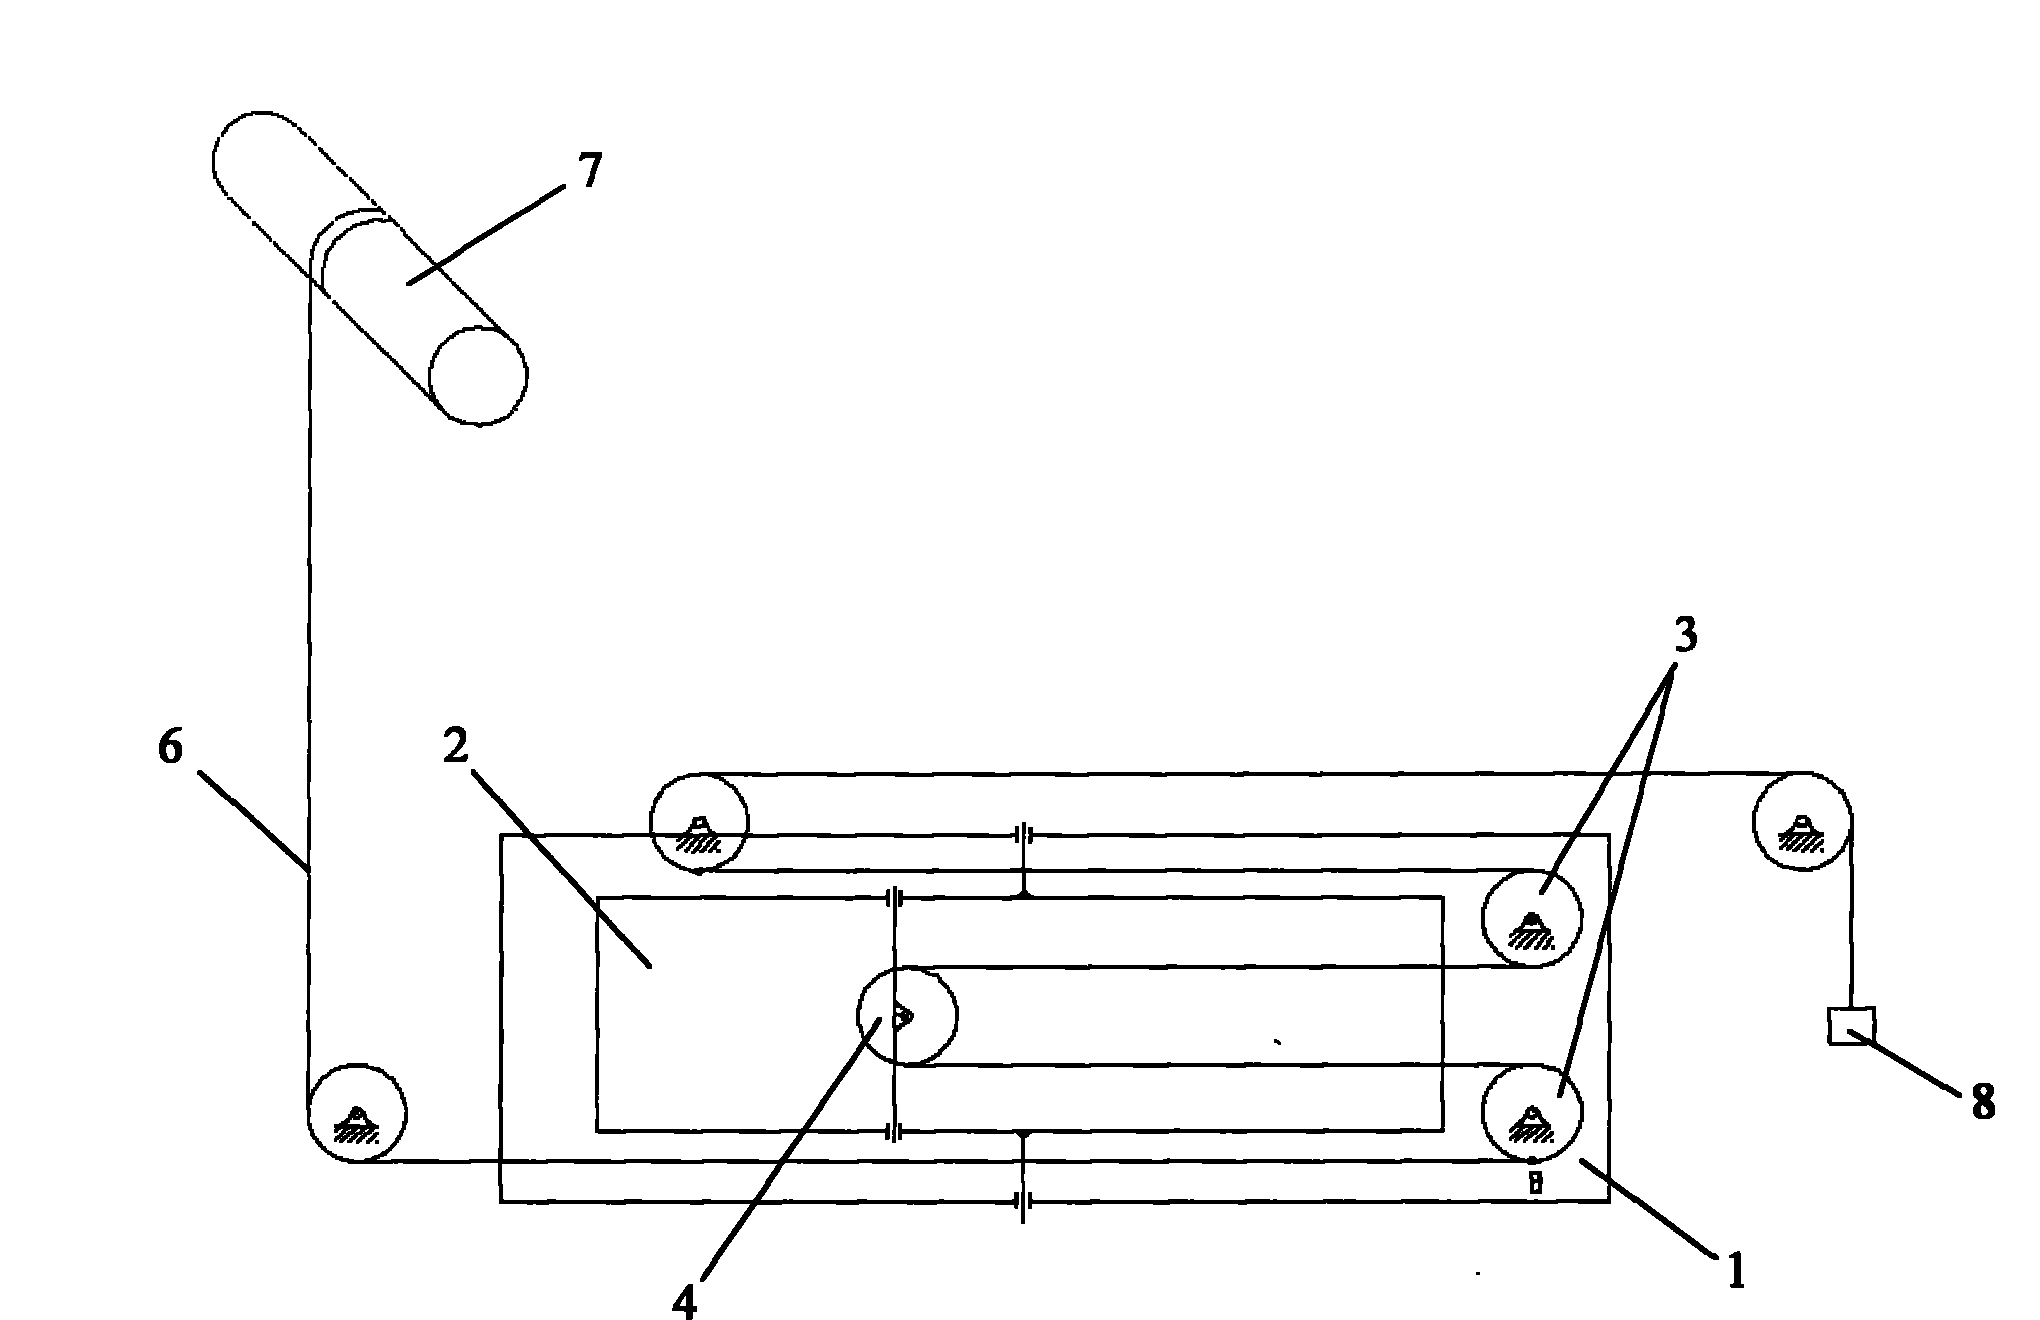 Underwater fuel conveying trolley and tipping-over device for pressurized water reactor